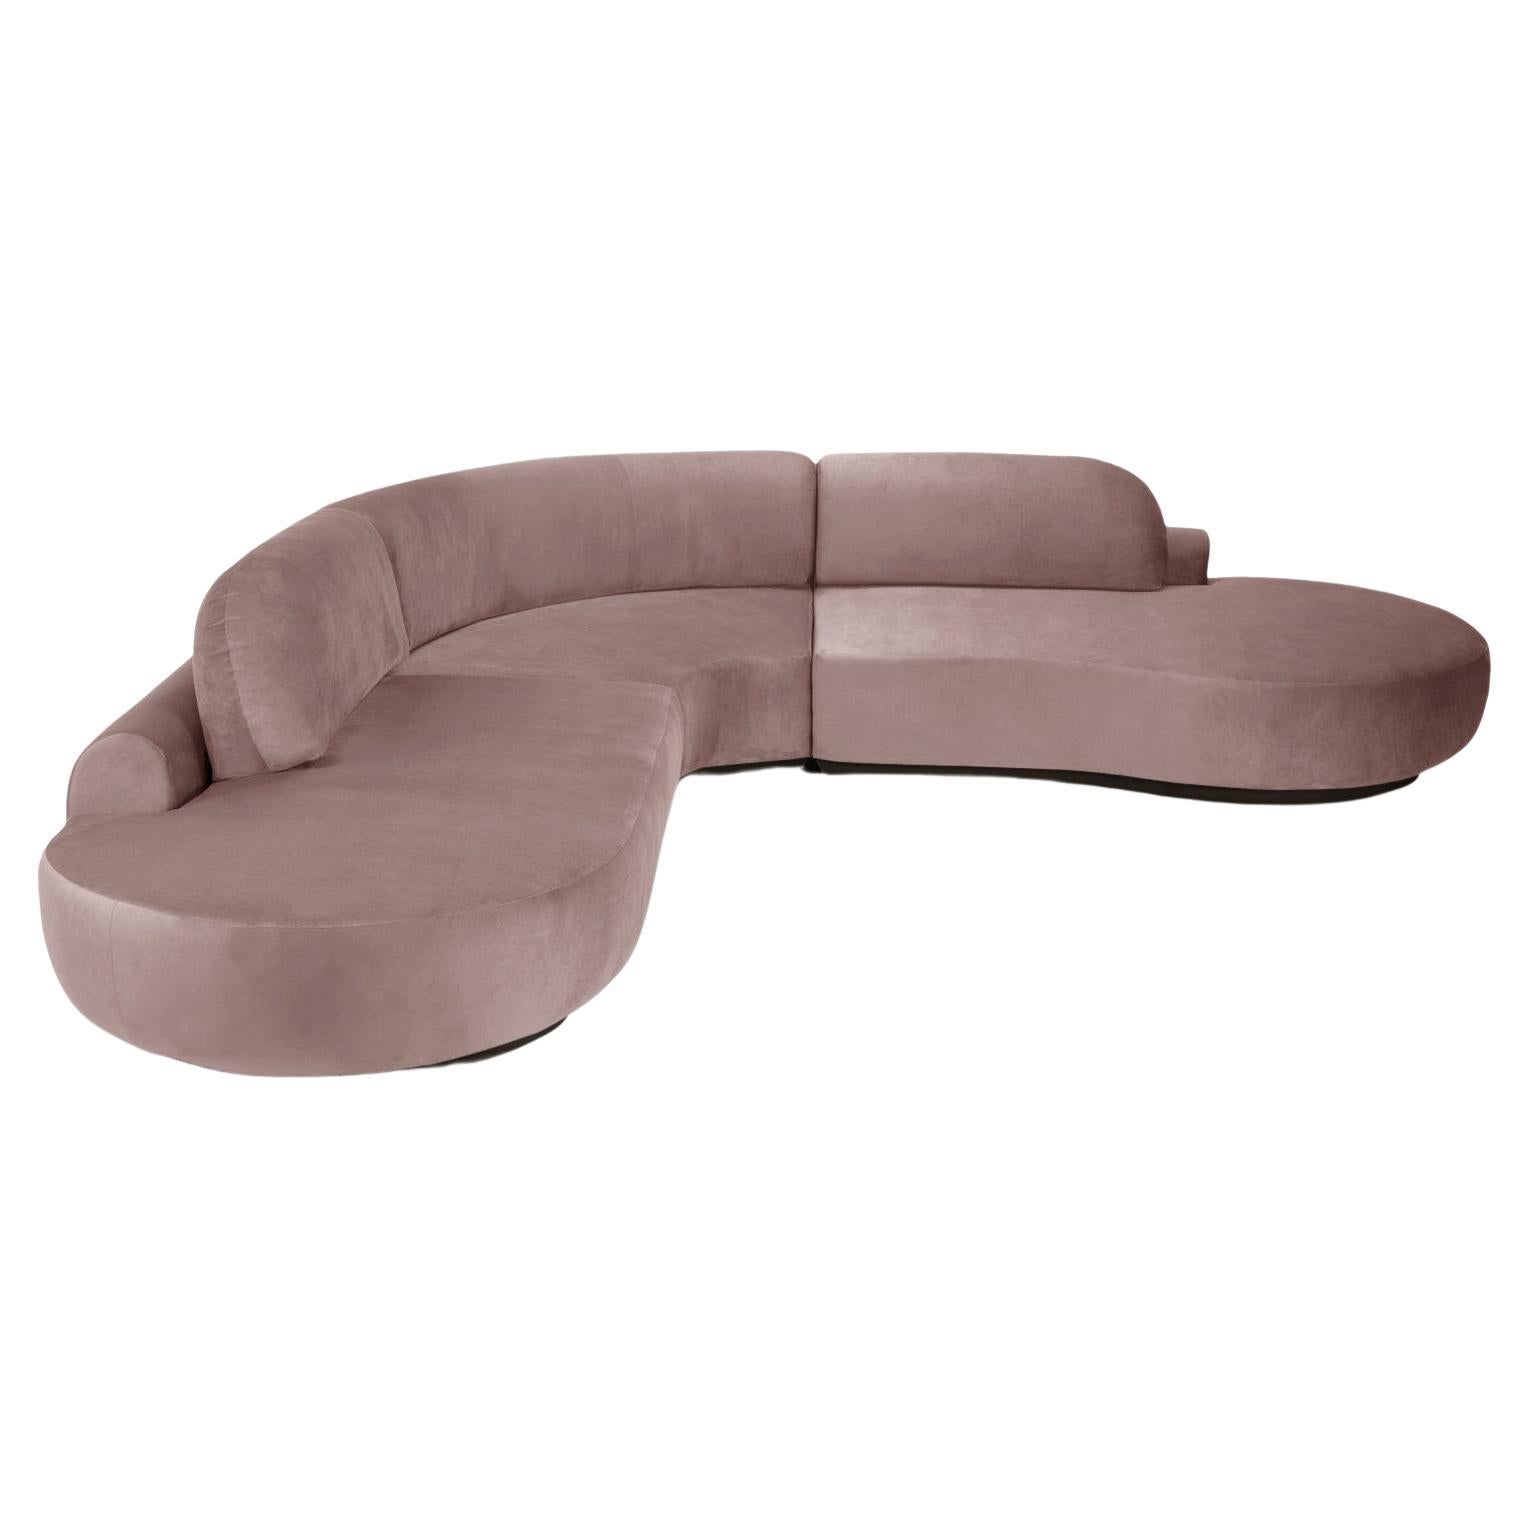 Naked Curved Sectional Sofa, 3 Piece with Beech Ash-056-5 and Barcelona Lotus For Sale